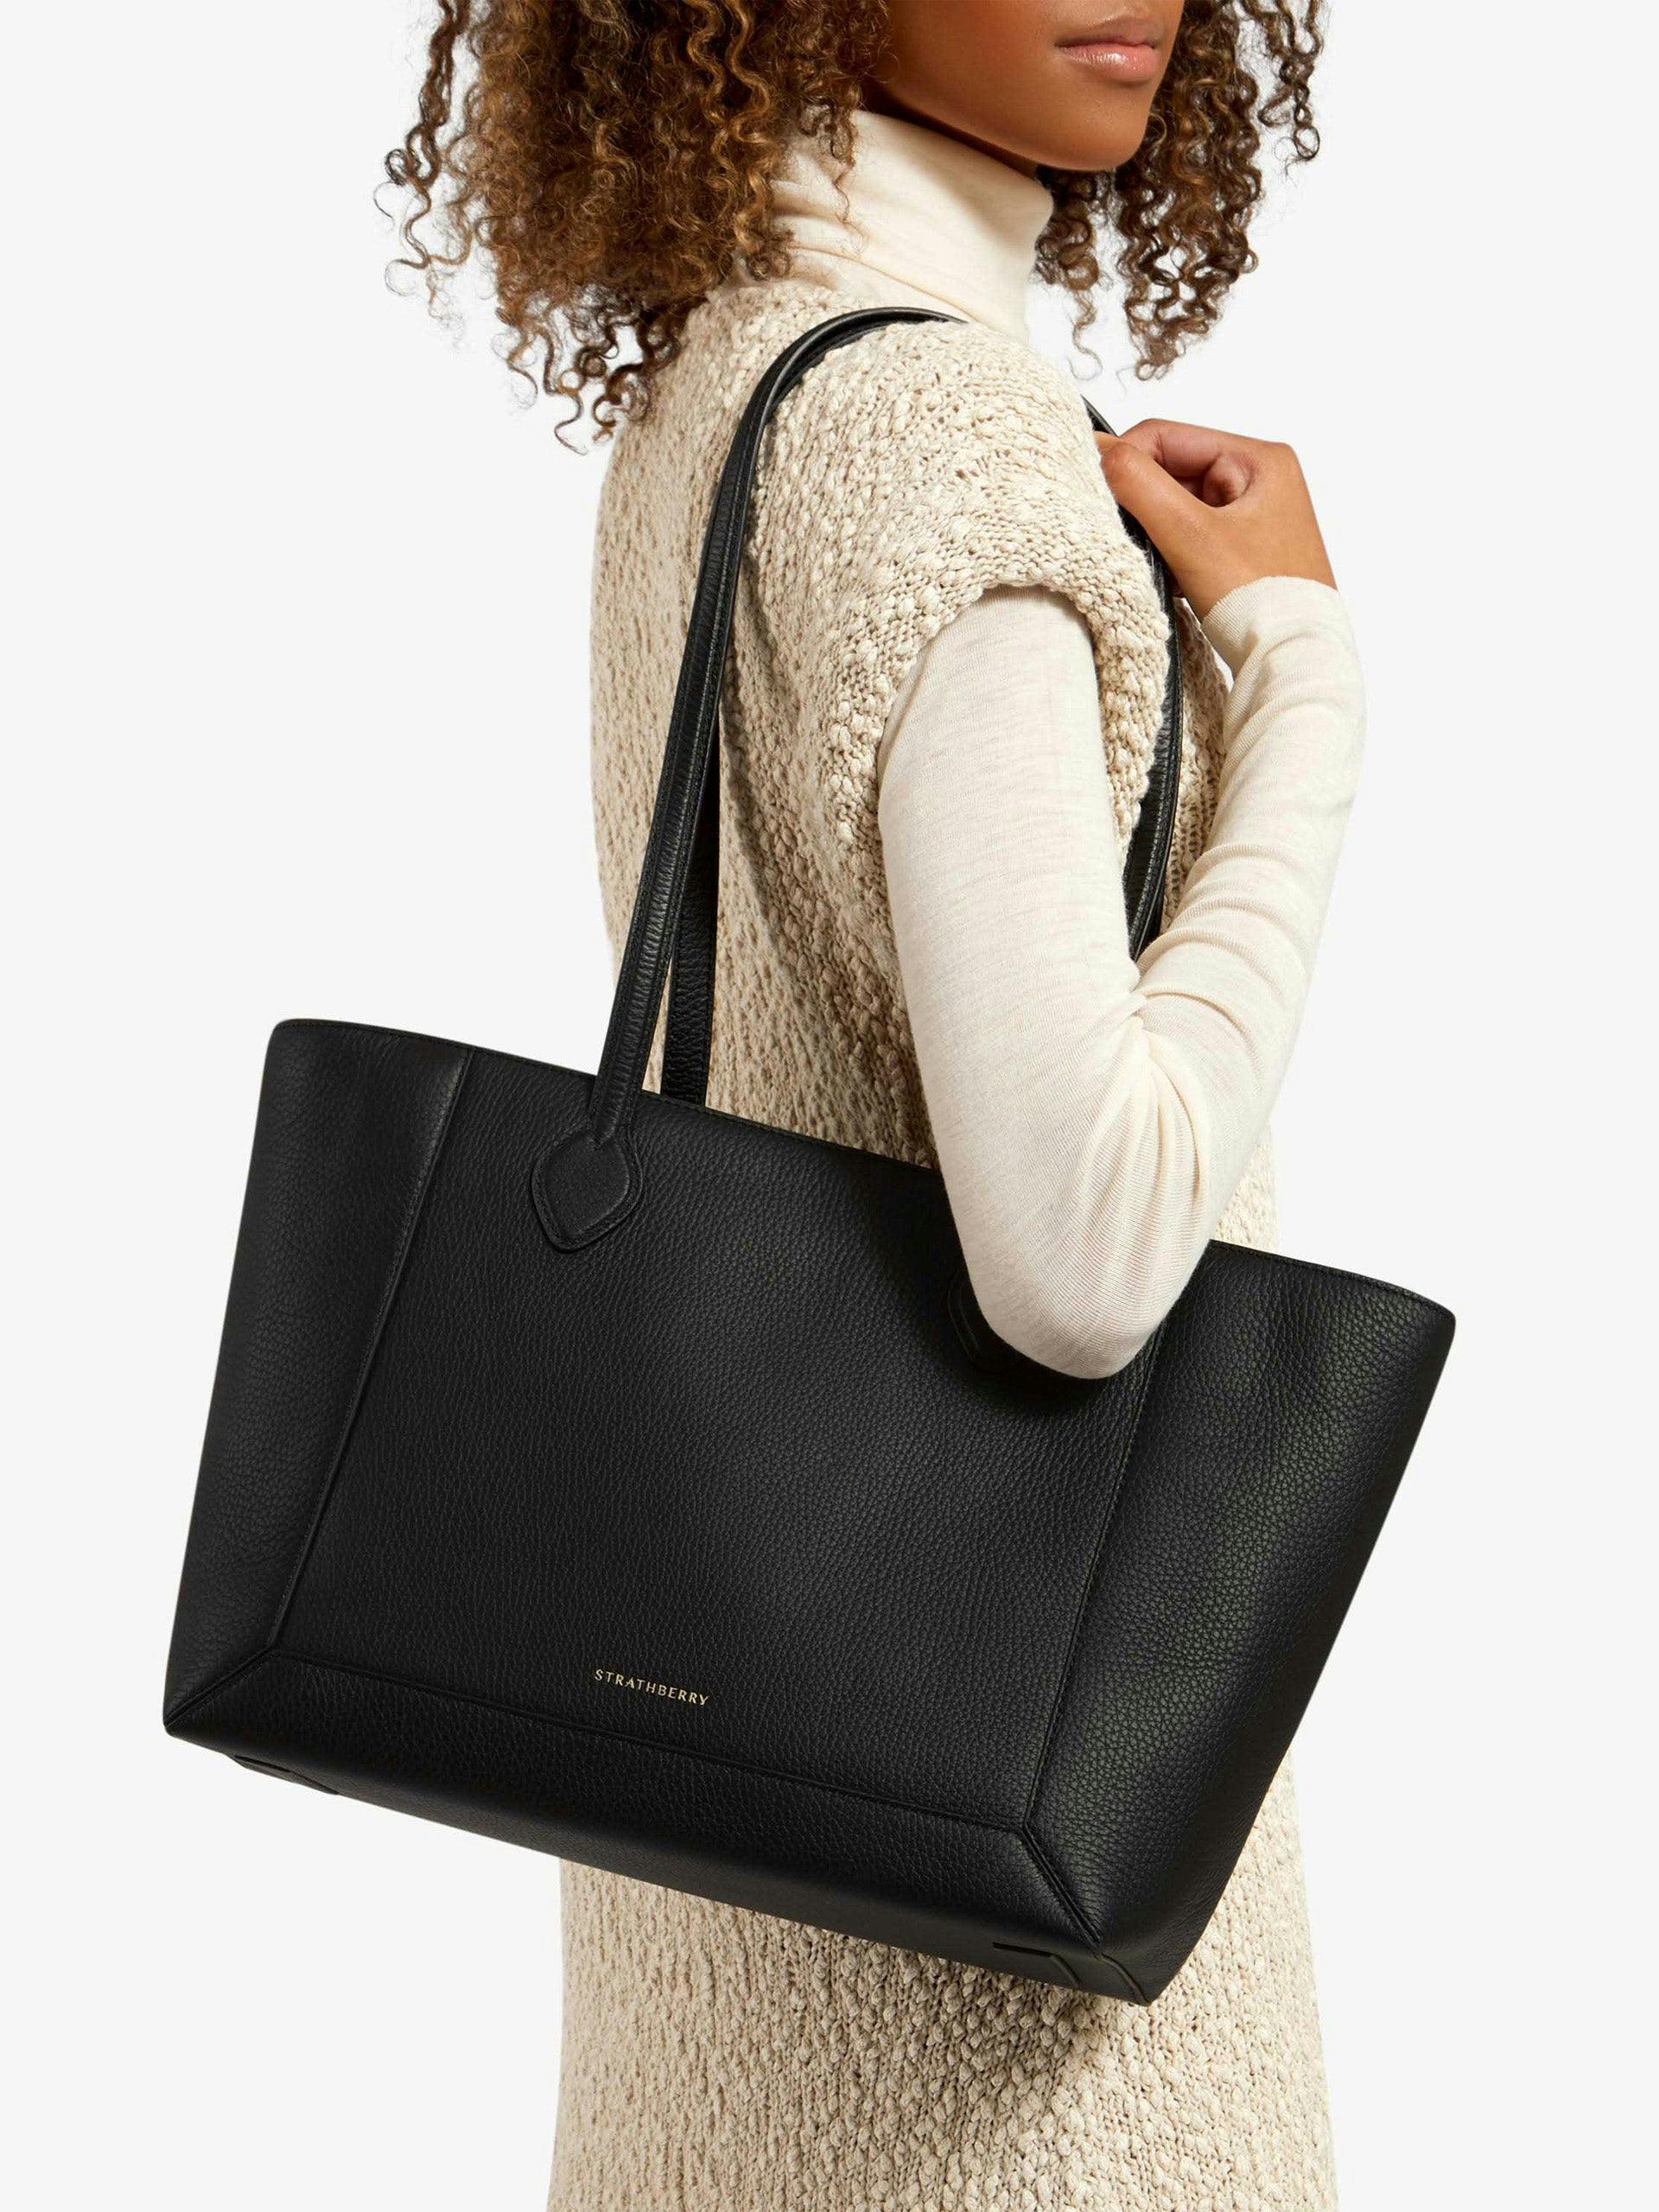 Strathberry’s answer to a go-anywhere bag that will fit all of your essentials: chic, understated, and fabulously functional. Collagerie.com